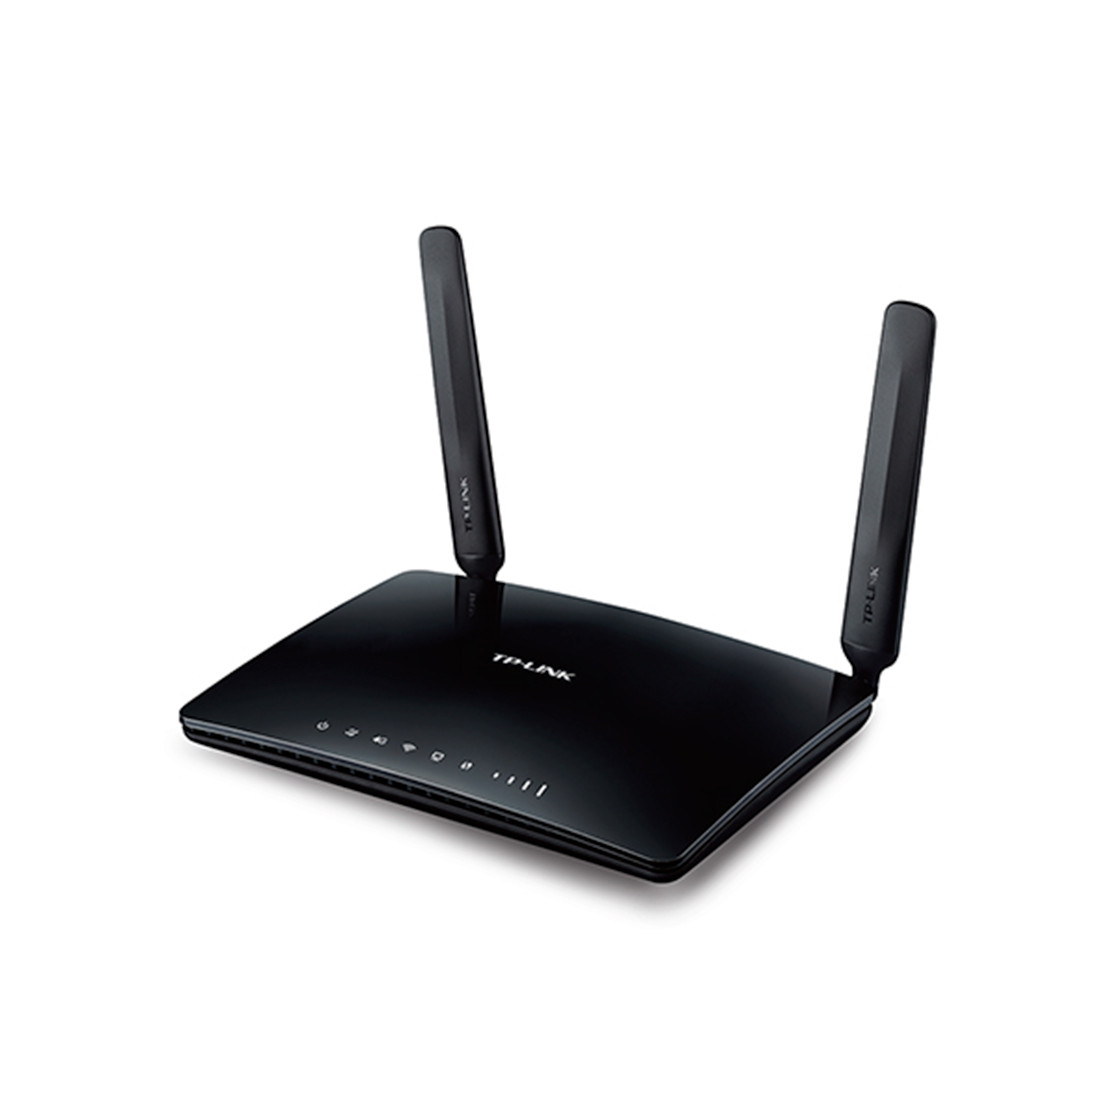 TP-LINK TL-MR6400 Маршрутизатор LTE N300 4G - фото 1 - id-p75208224